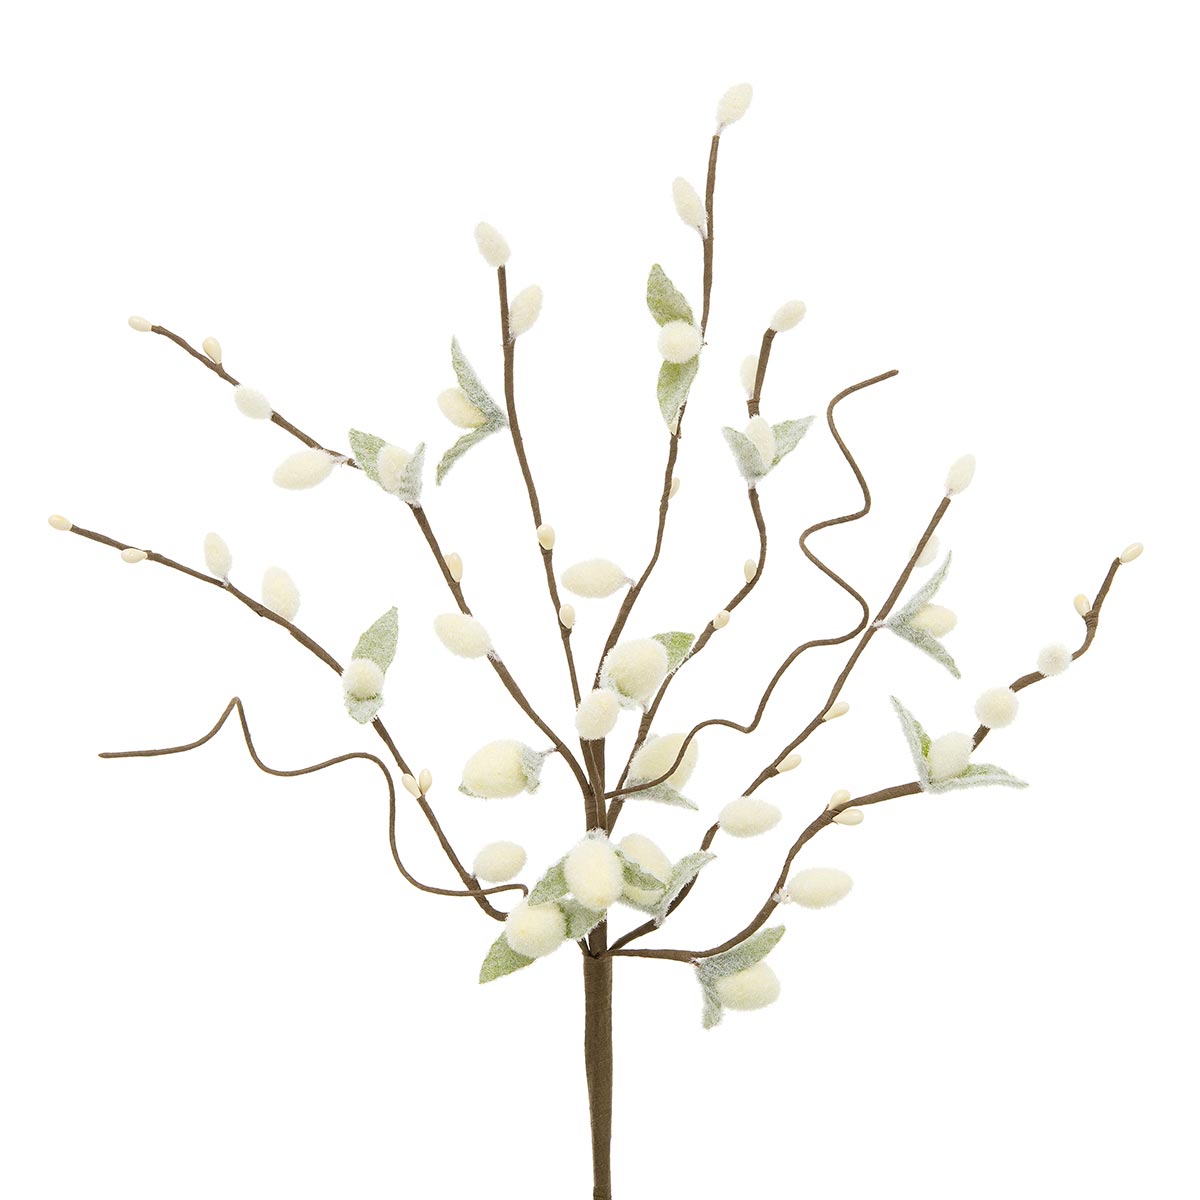 PUSSY WILLOW BUSH WITH WHITE PIP BERRIES 5"X16"